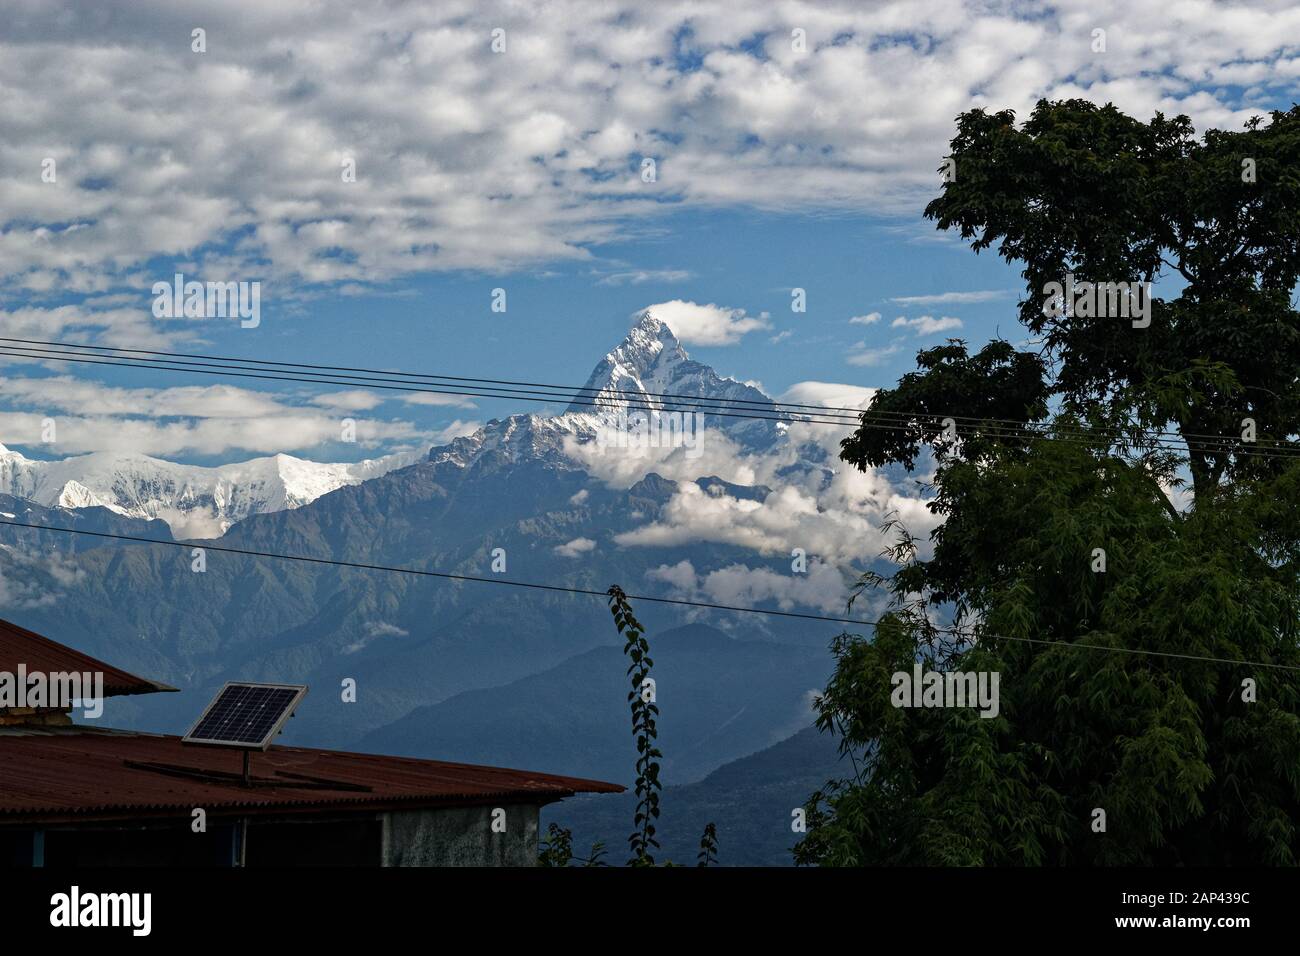 The peak of the fishtail mountain as seen from a lodge in Pubmdi Bumdi village Stock Photo